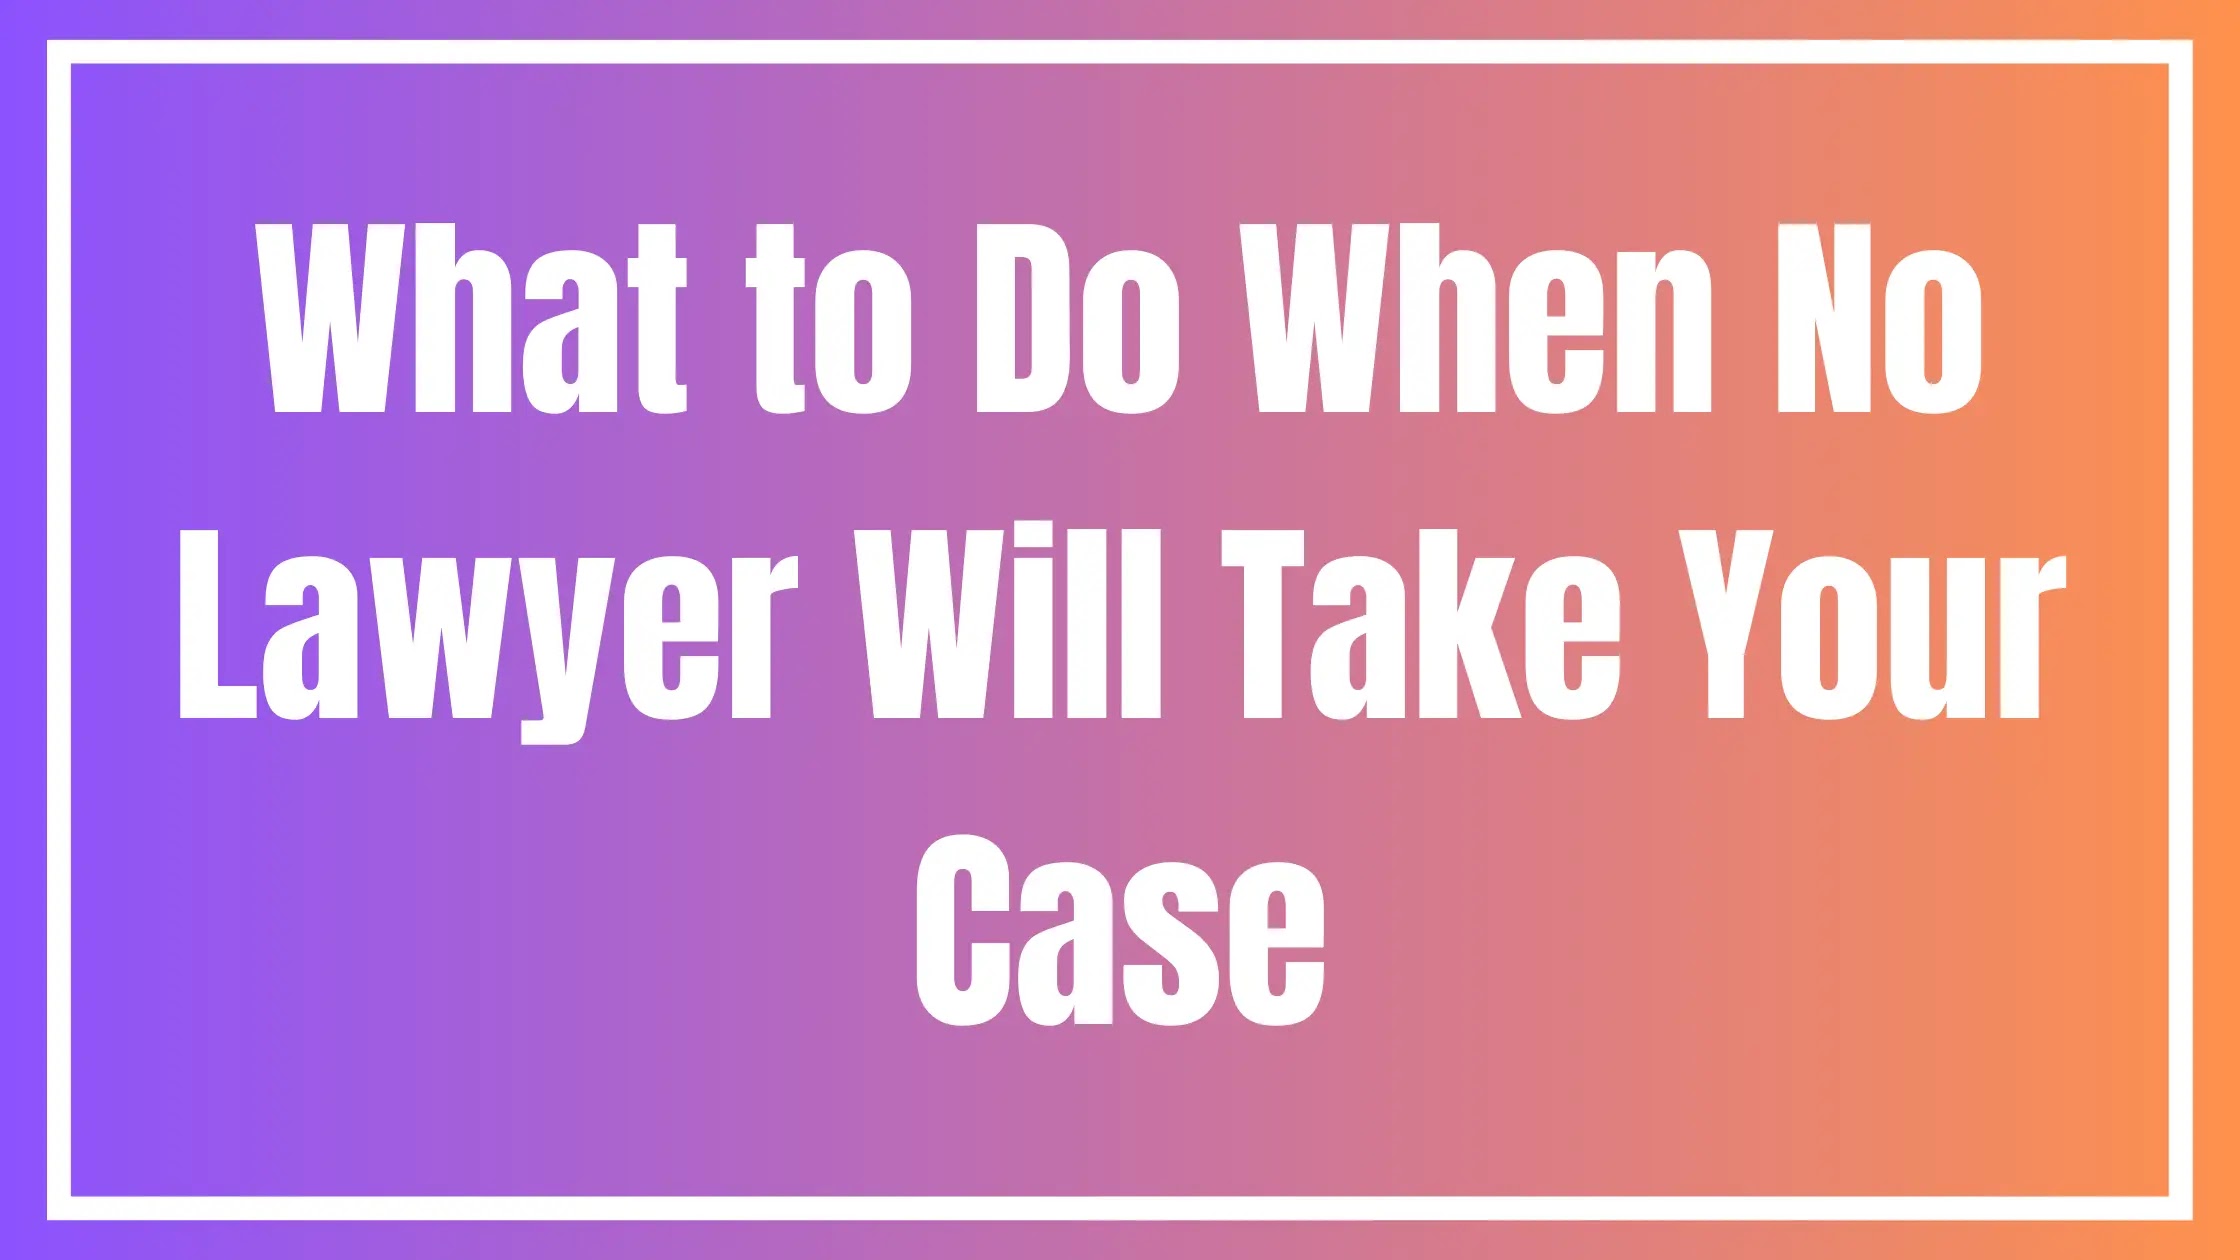 What to Do When No Lawyer Will Take Your Case